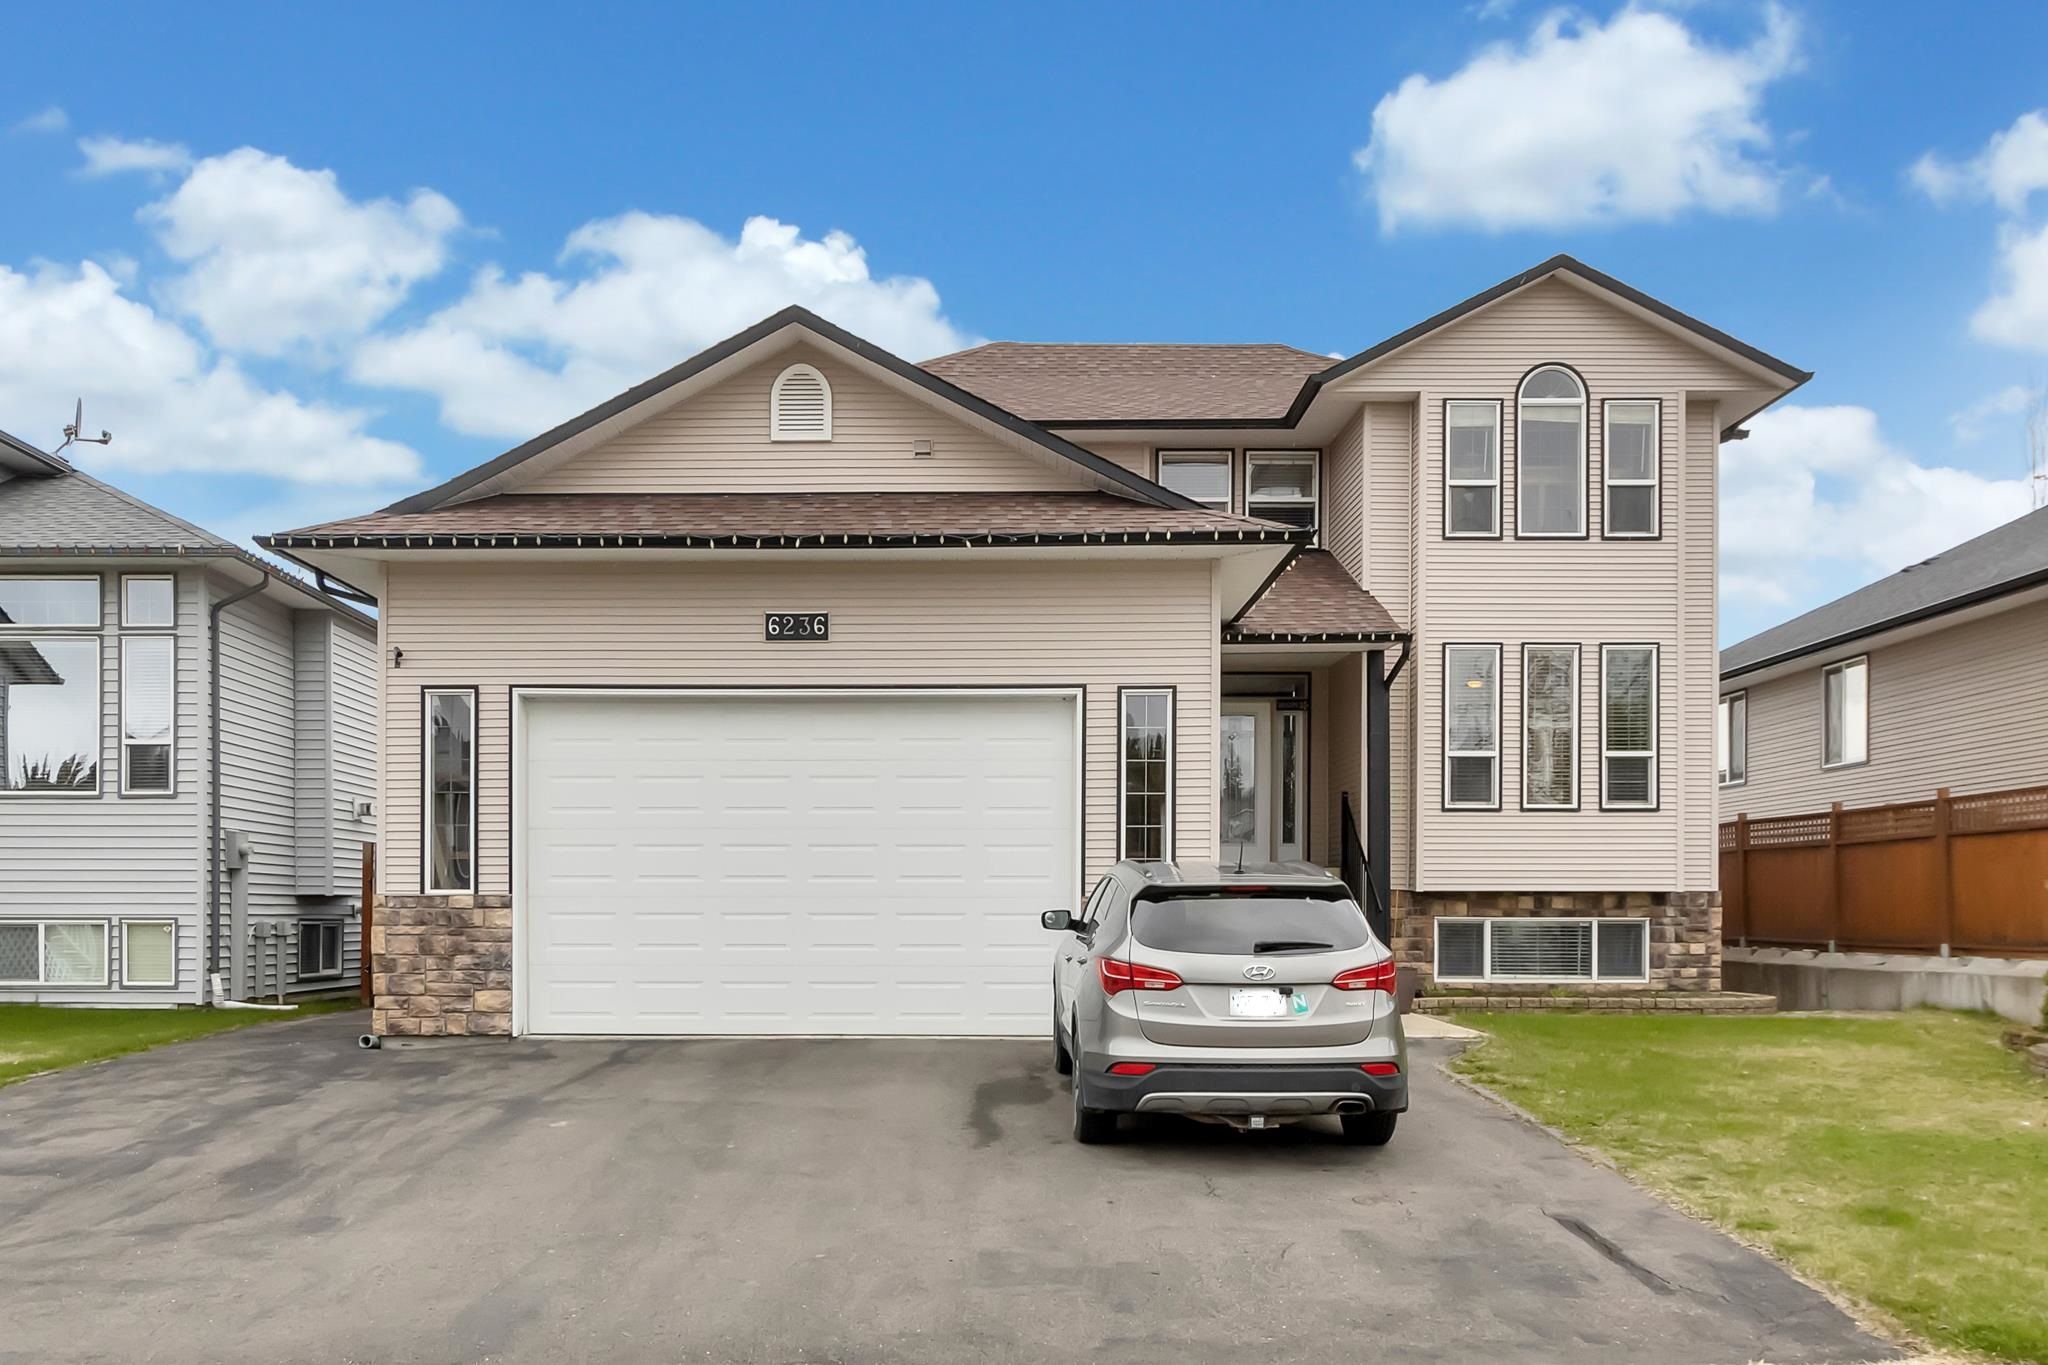 Open House. Open House on Sunday, May 29, 2022 1:30PM - 3:00PM
Join Garnet Weston and check out this amazing home!